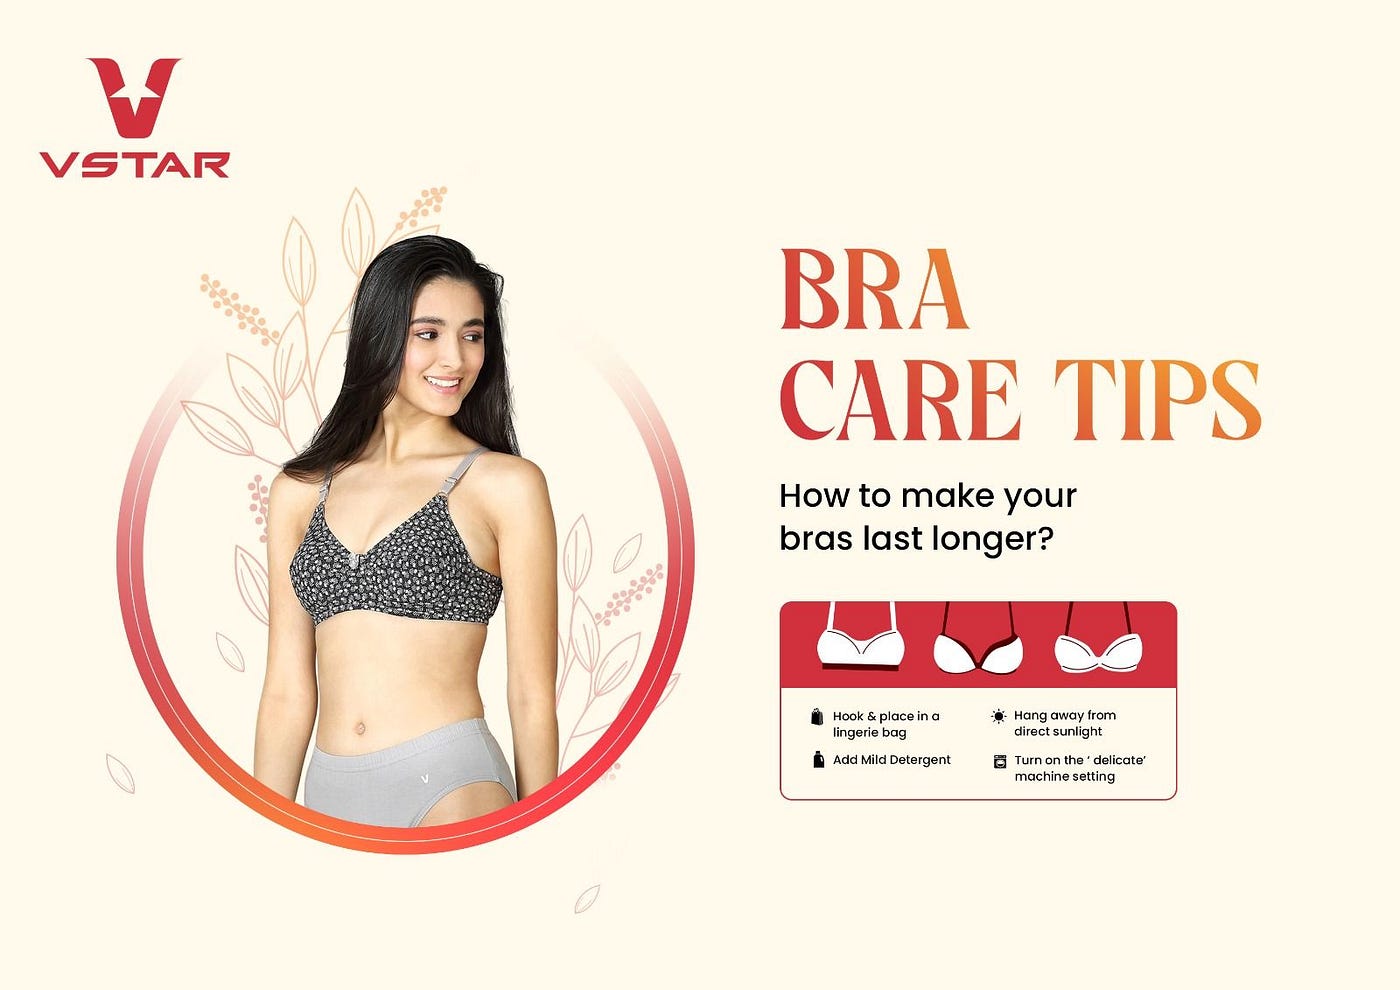 Bra Care Tips: How To Make Your Bras Last Longer, by Falan Kaur